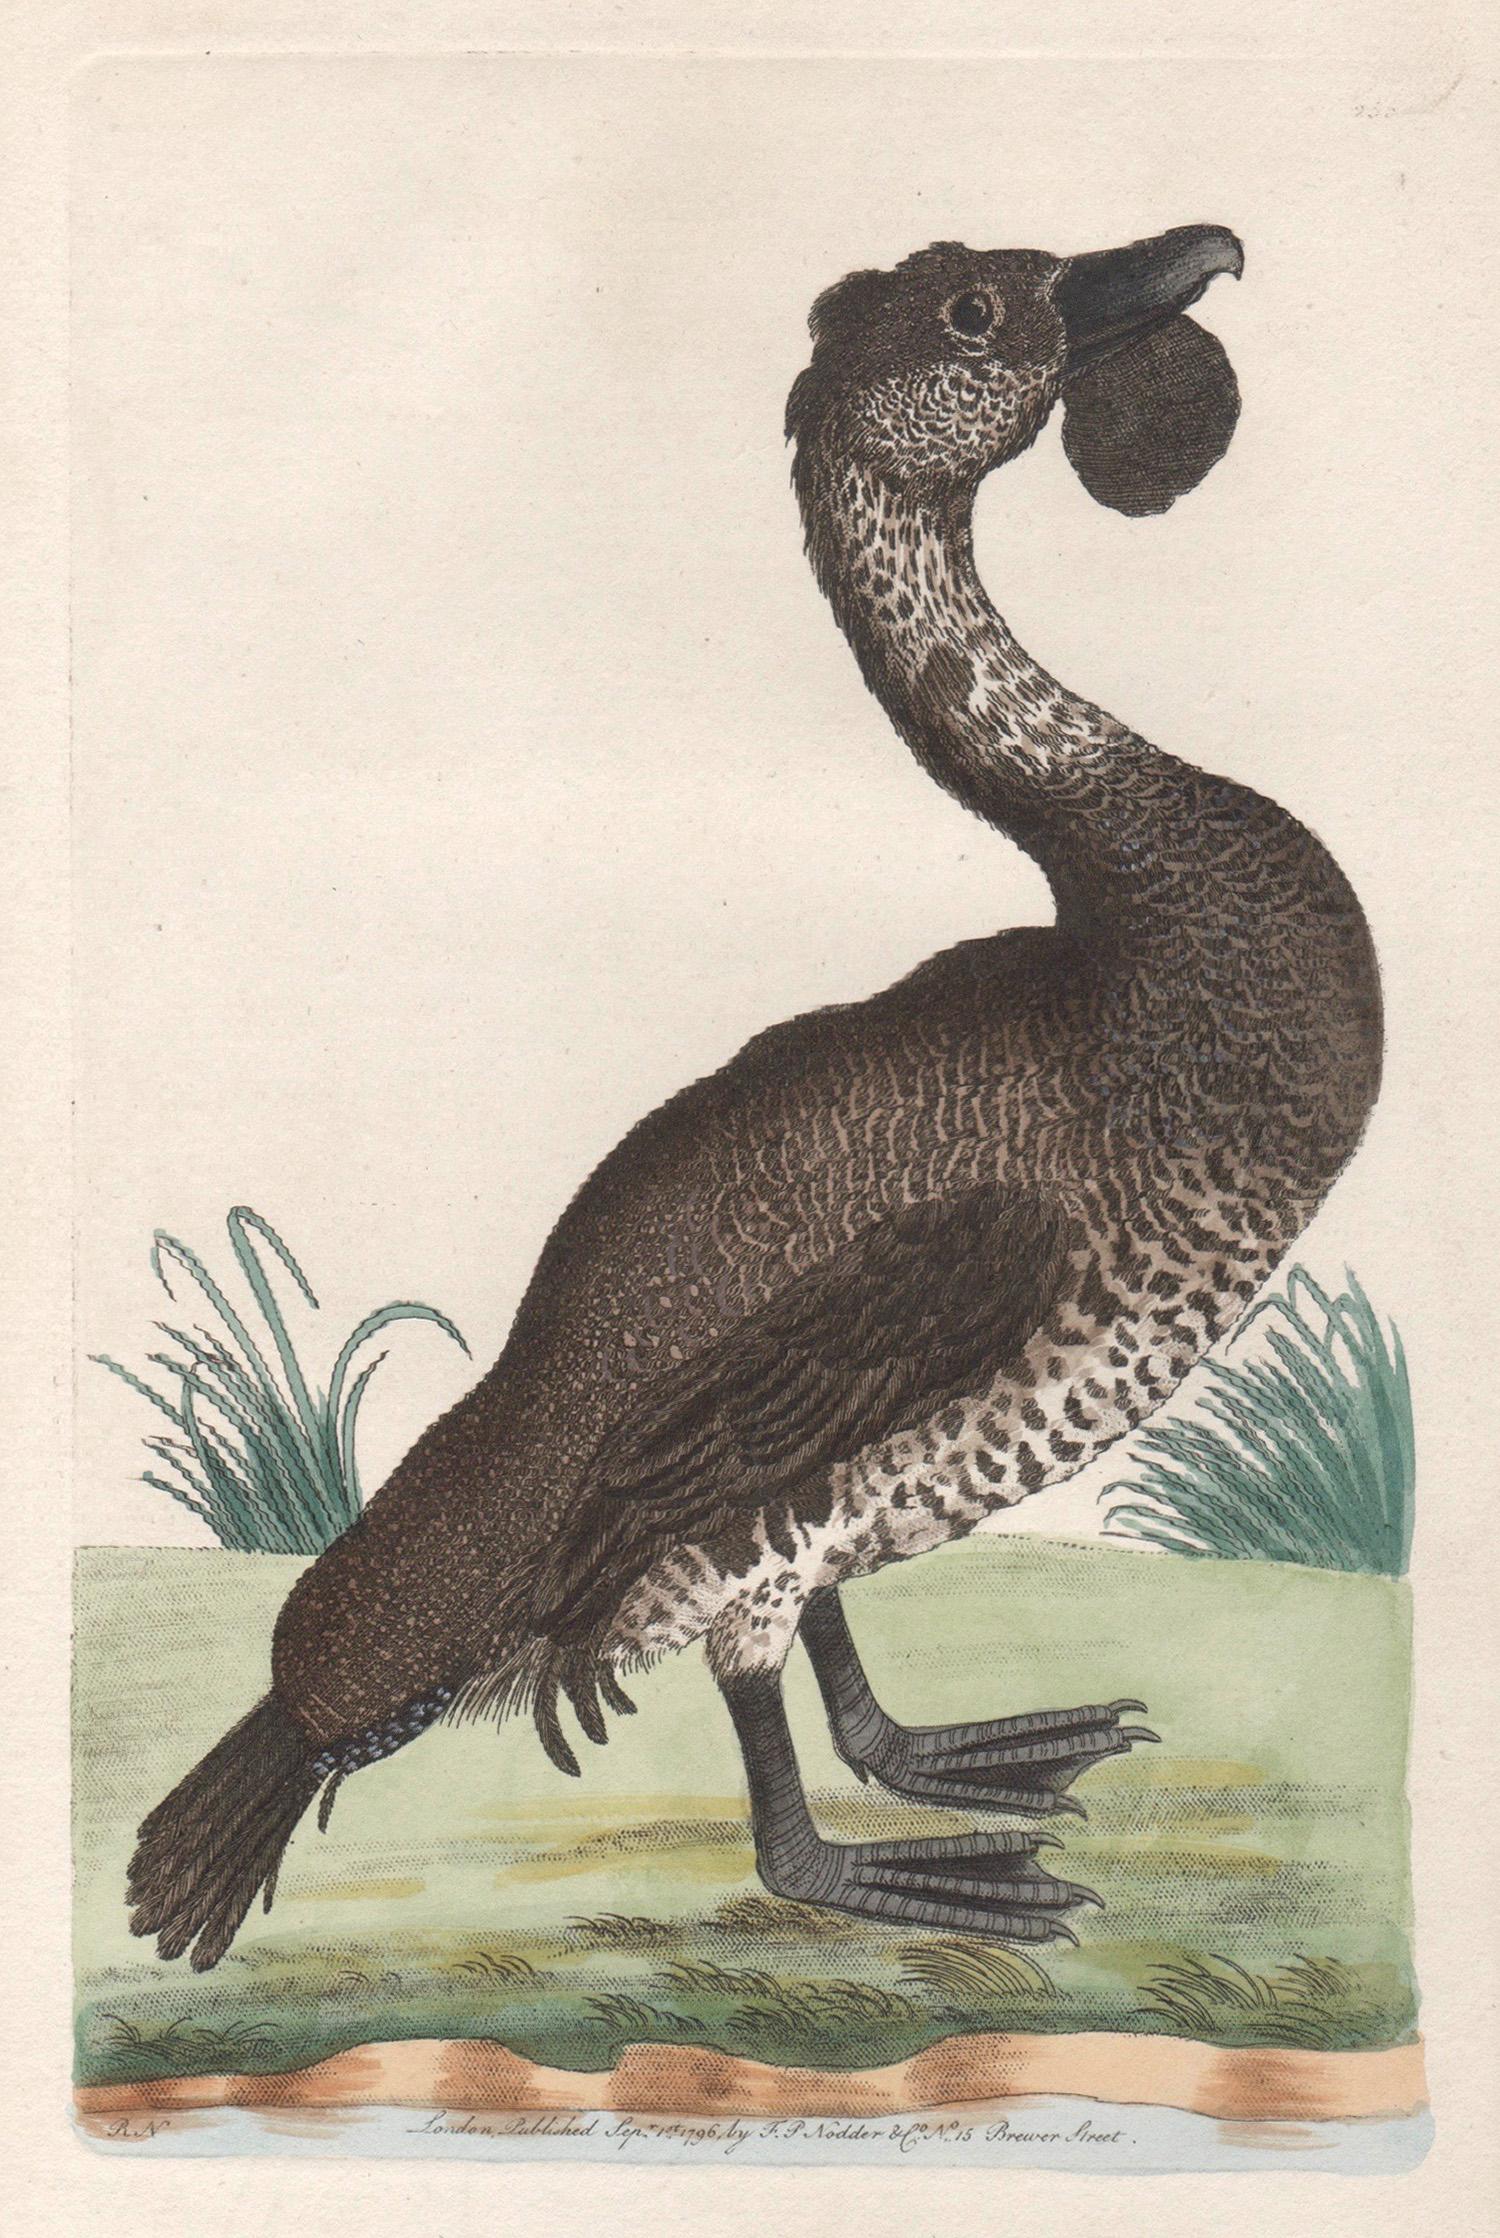 The Lobated Musk Duck, Australia, engraving with original hand-colouring, 1795